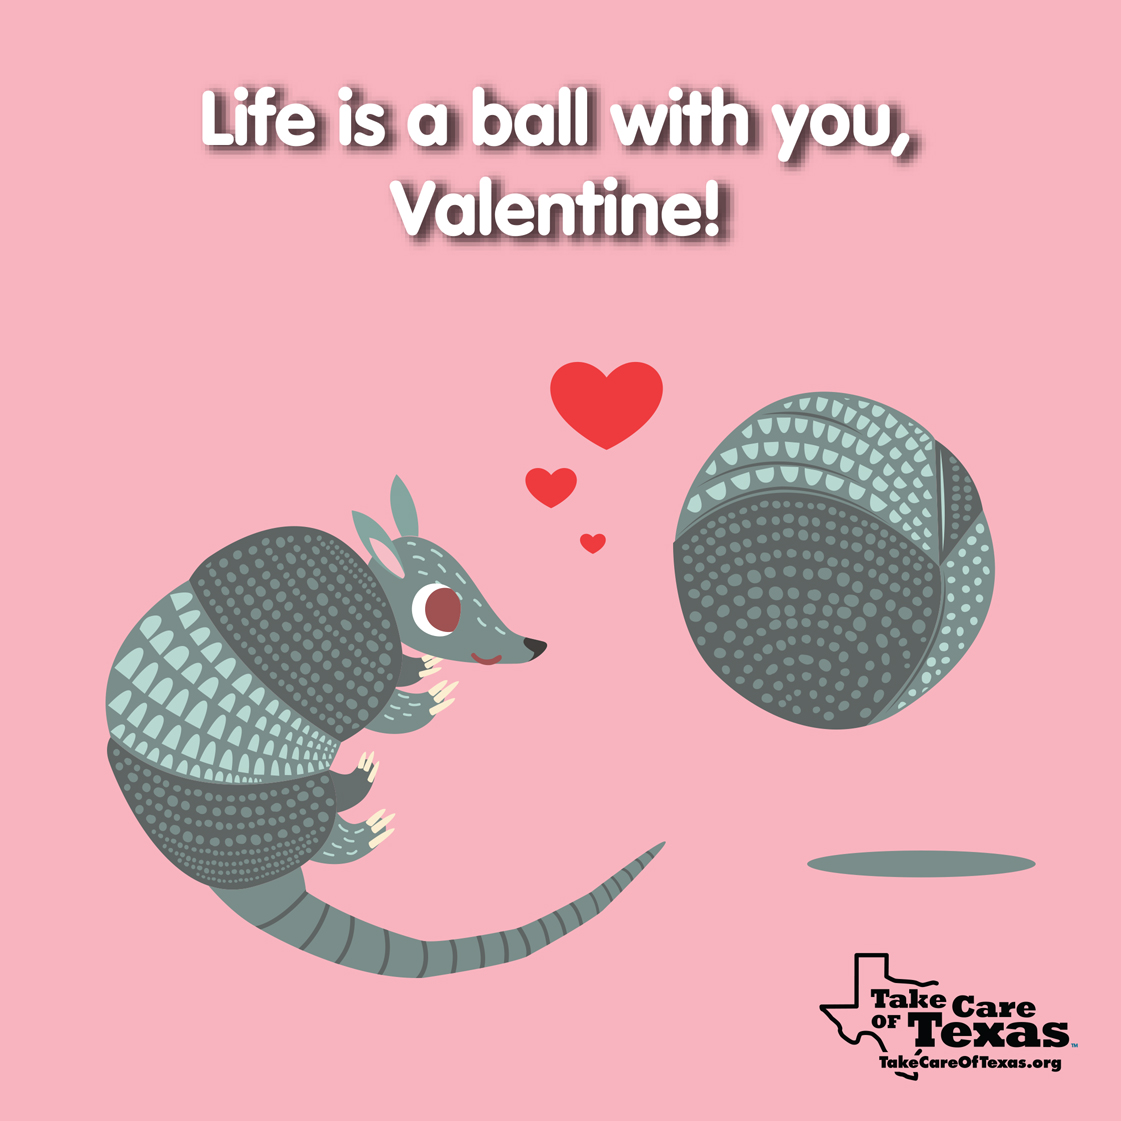 Armadillos with the text "Life's a ball with you, Valentine!"